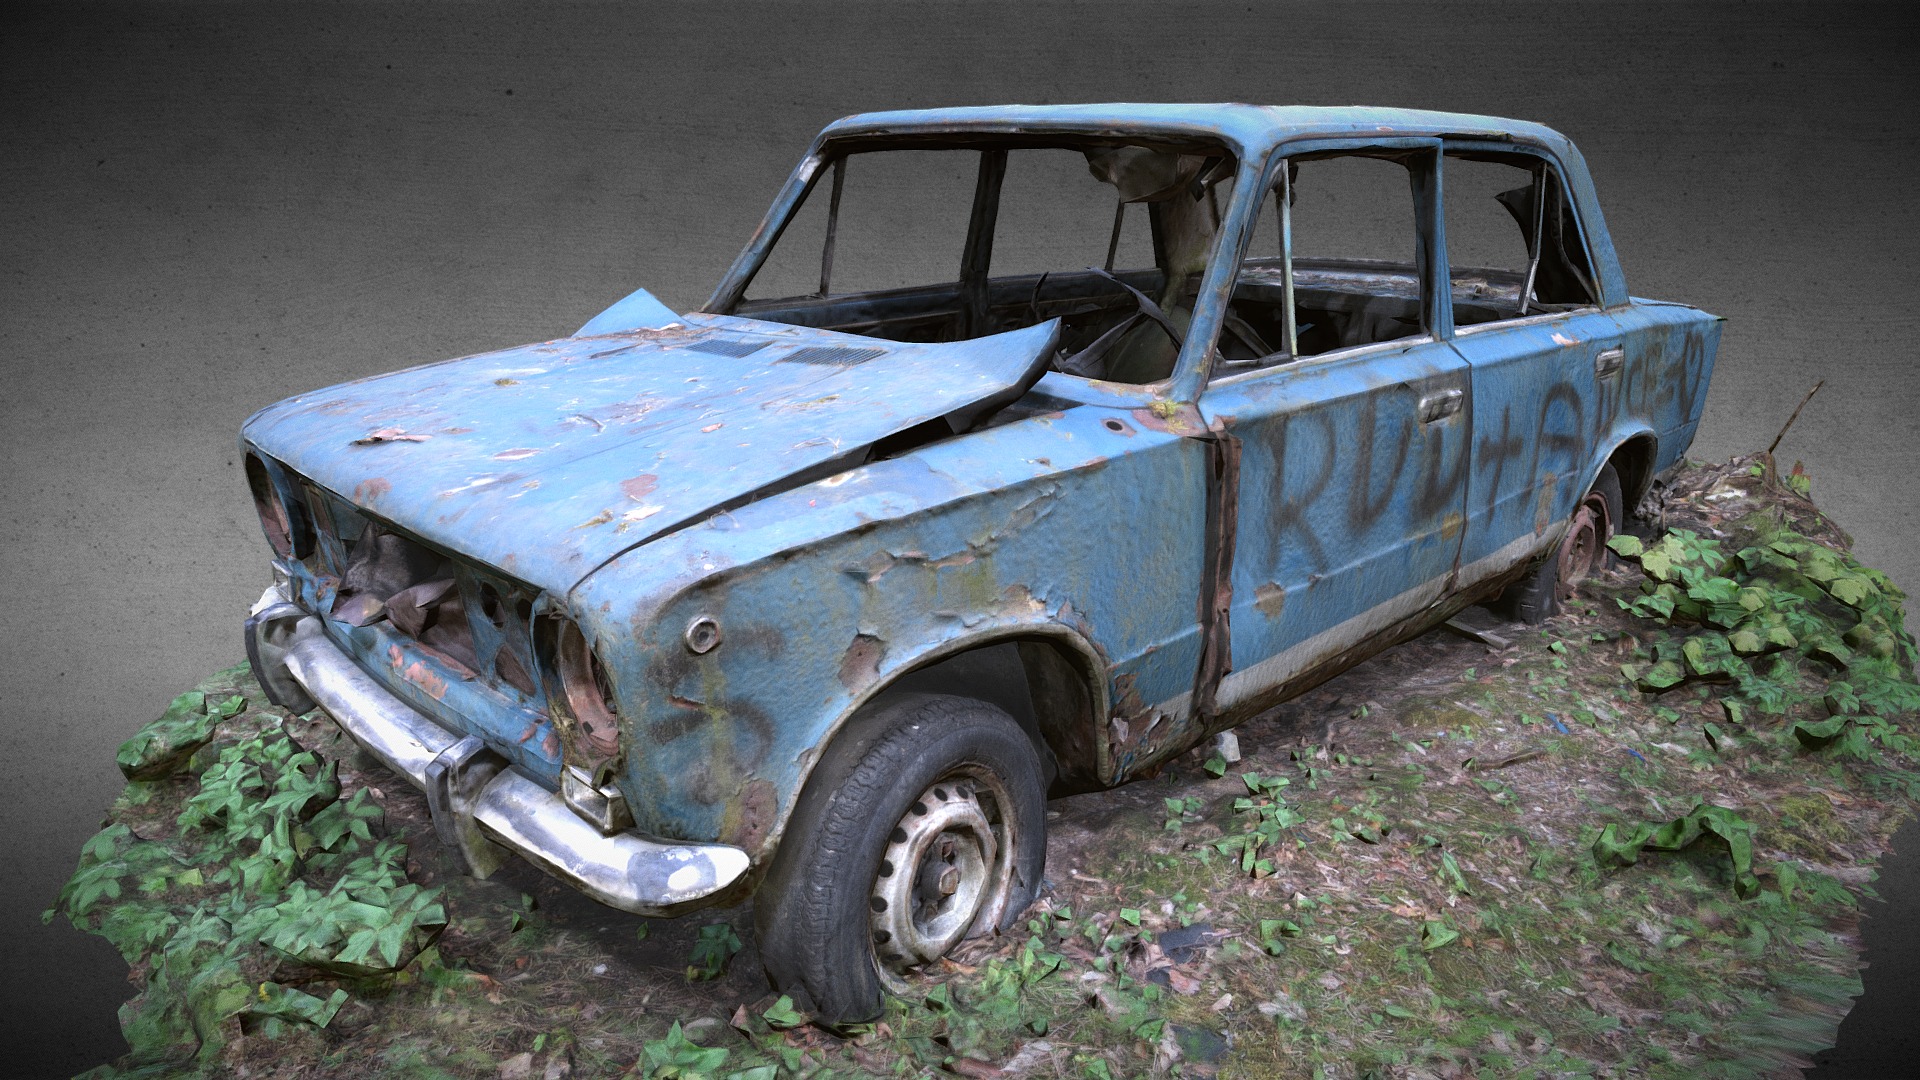 3D model Vaz-2101 Wreck - This is a 3D model of the Vaz-2101 Wreck. The 3D model is about a car with the front end smashed.